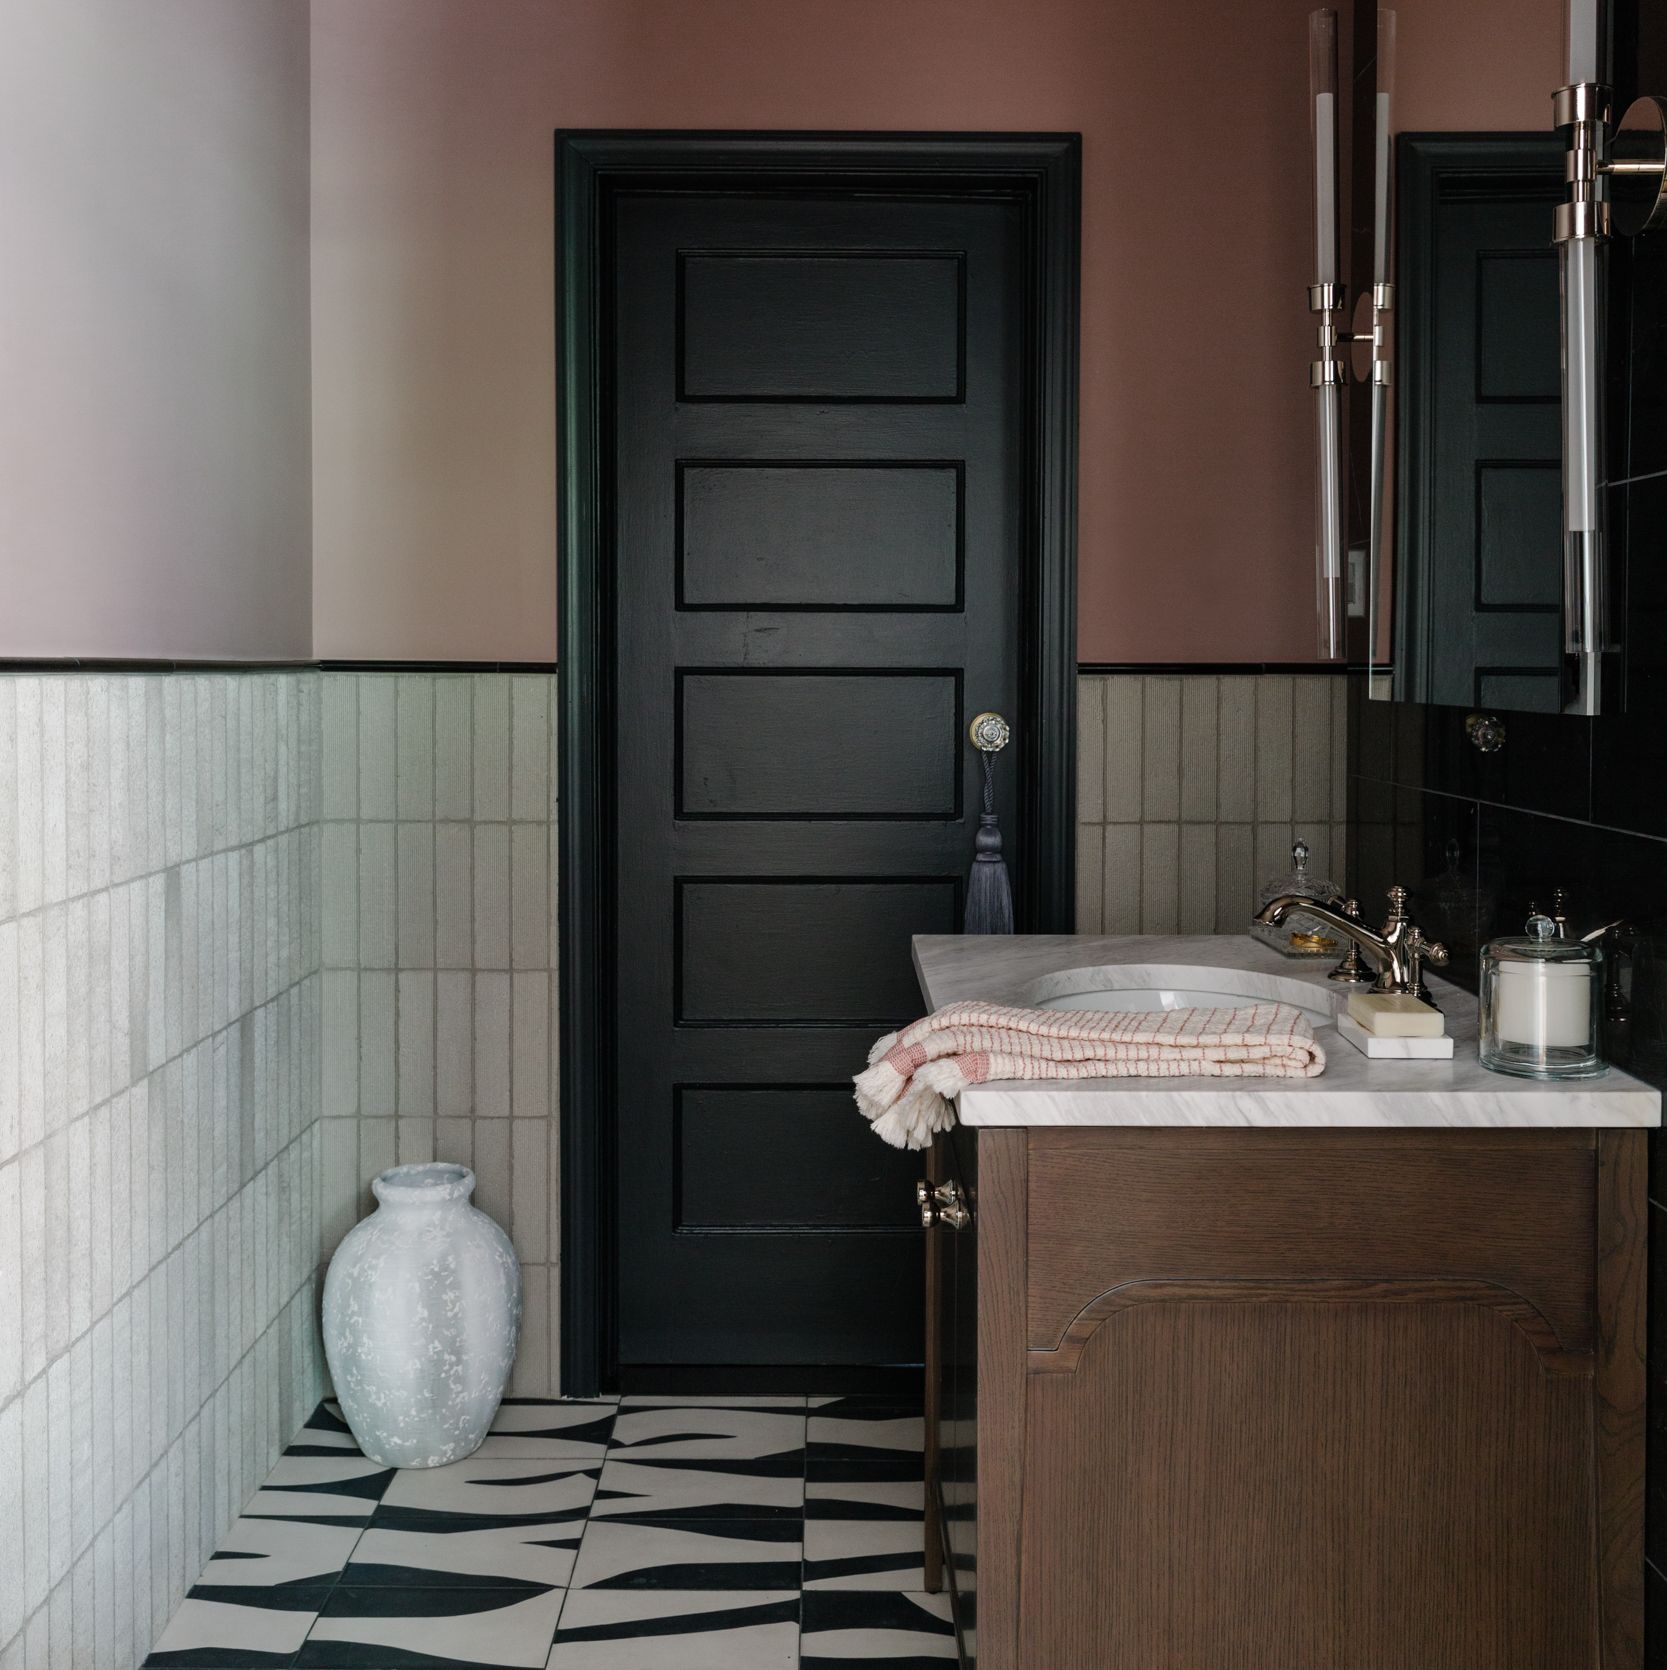 This Demure Brooklyn Bathroom Boasts Bold Black-and-White Floor Tiles Inspired by Art